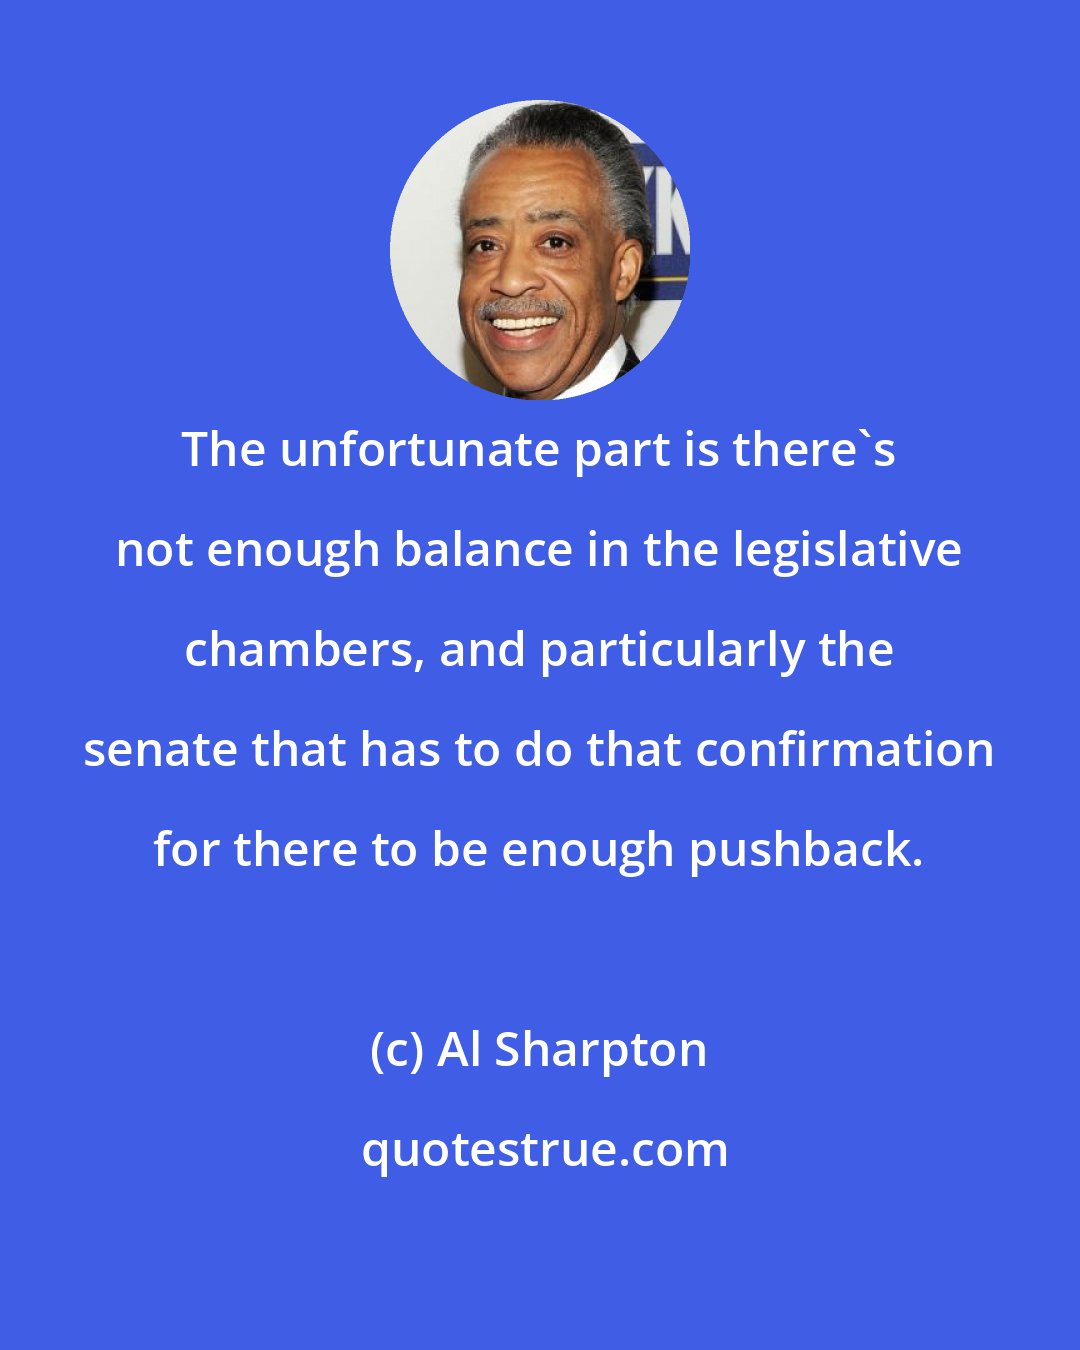 Al Sharpton: The unfortunate part is there`s not enough balance in the legislative chambers, and particularly the senate that has to do that confirmation for there to be enough pushback.